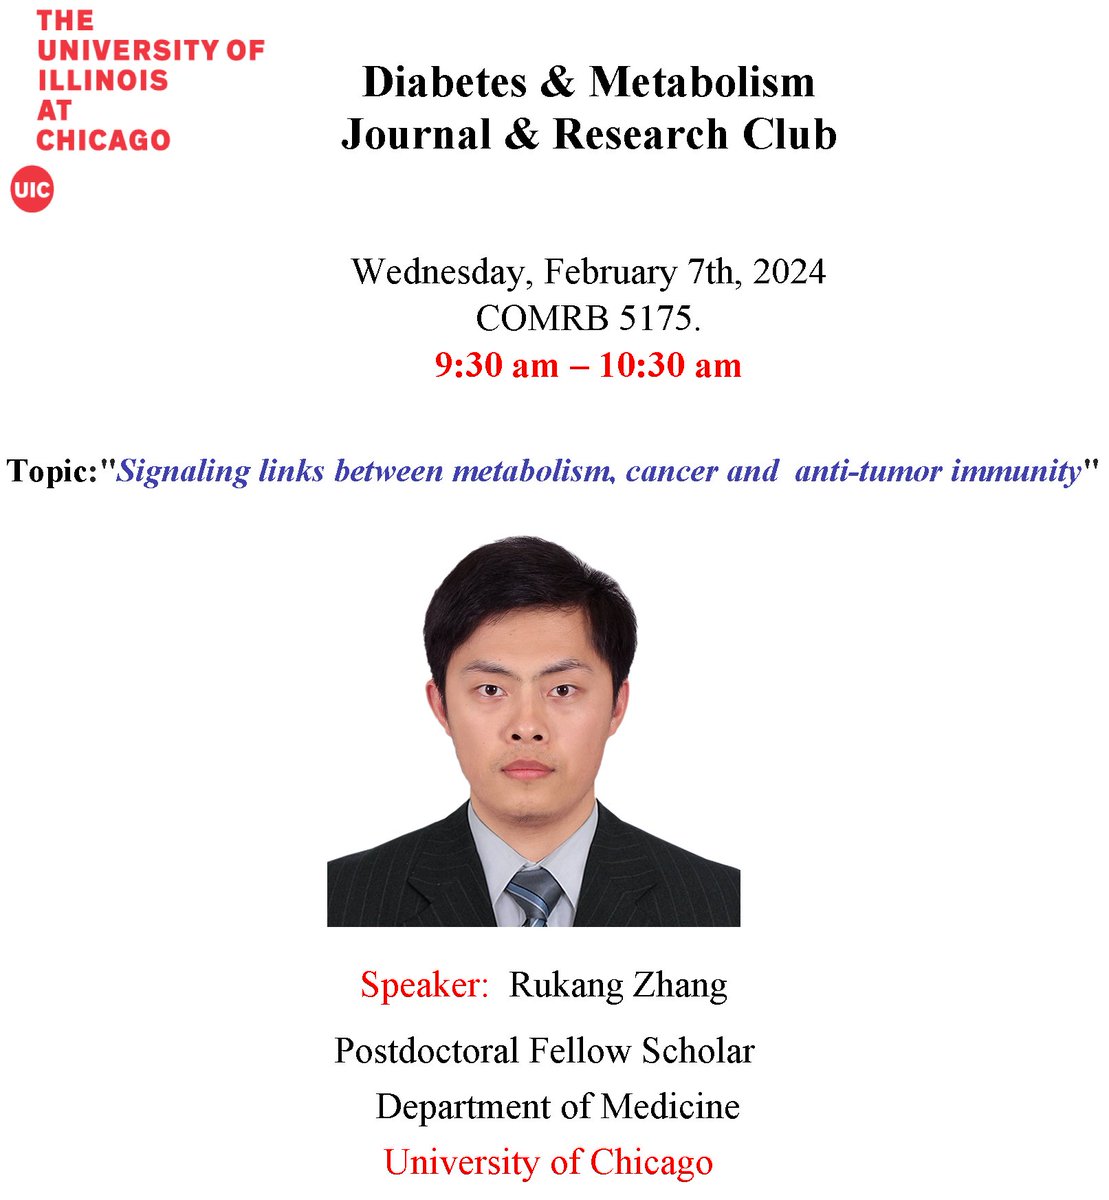 Our next speaker in the Diabetes & Metabolism Journal and Research Club will be Dr. Rukang Zhang from @UChicago. Feb. 7th 2024, 9:30am, COMRB 5175 DM for Zoom link. @uiccom @UICancerCenter @UICnews @UICDom